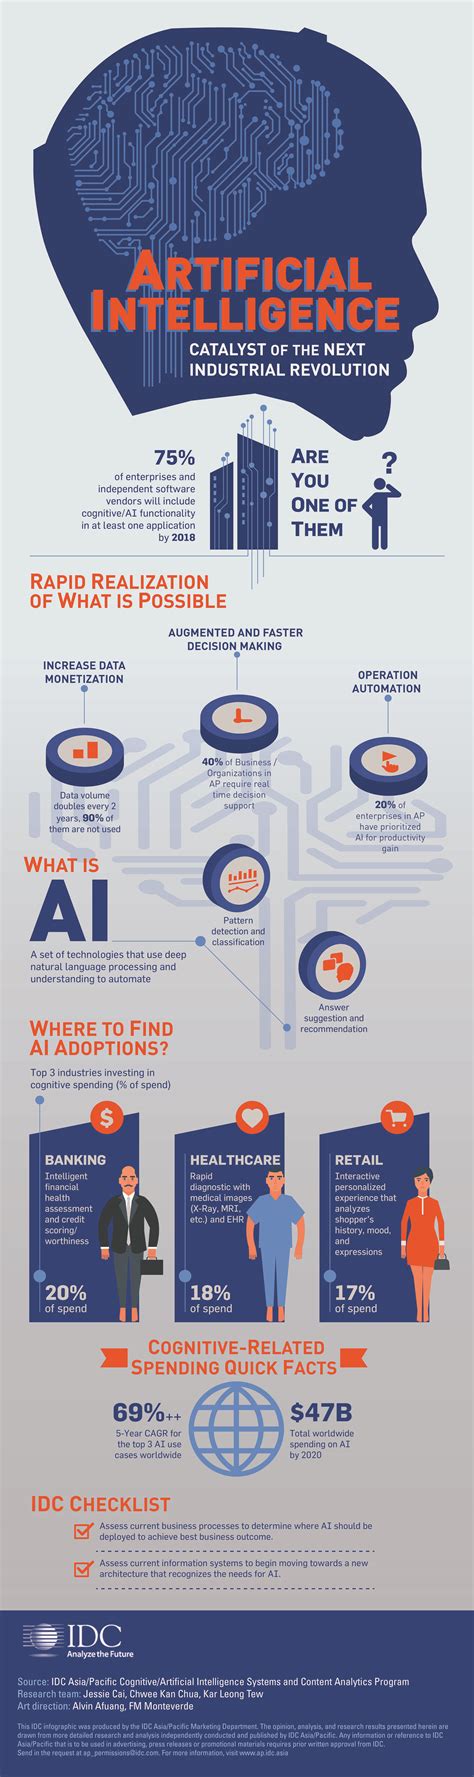 Idc Published A New Infographic Artificial Intelligence Catalyst Of